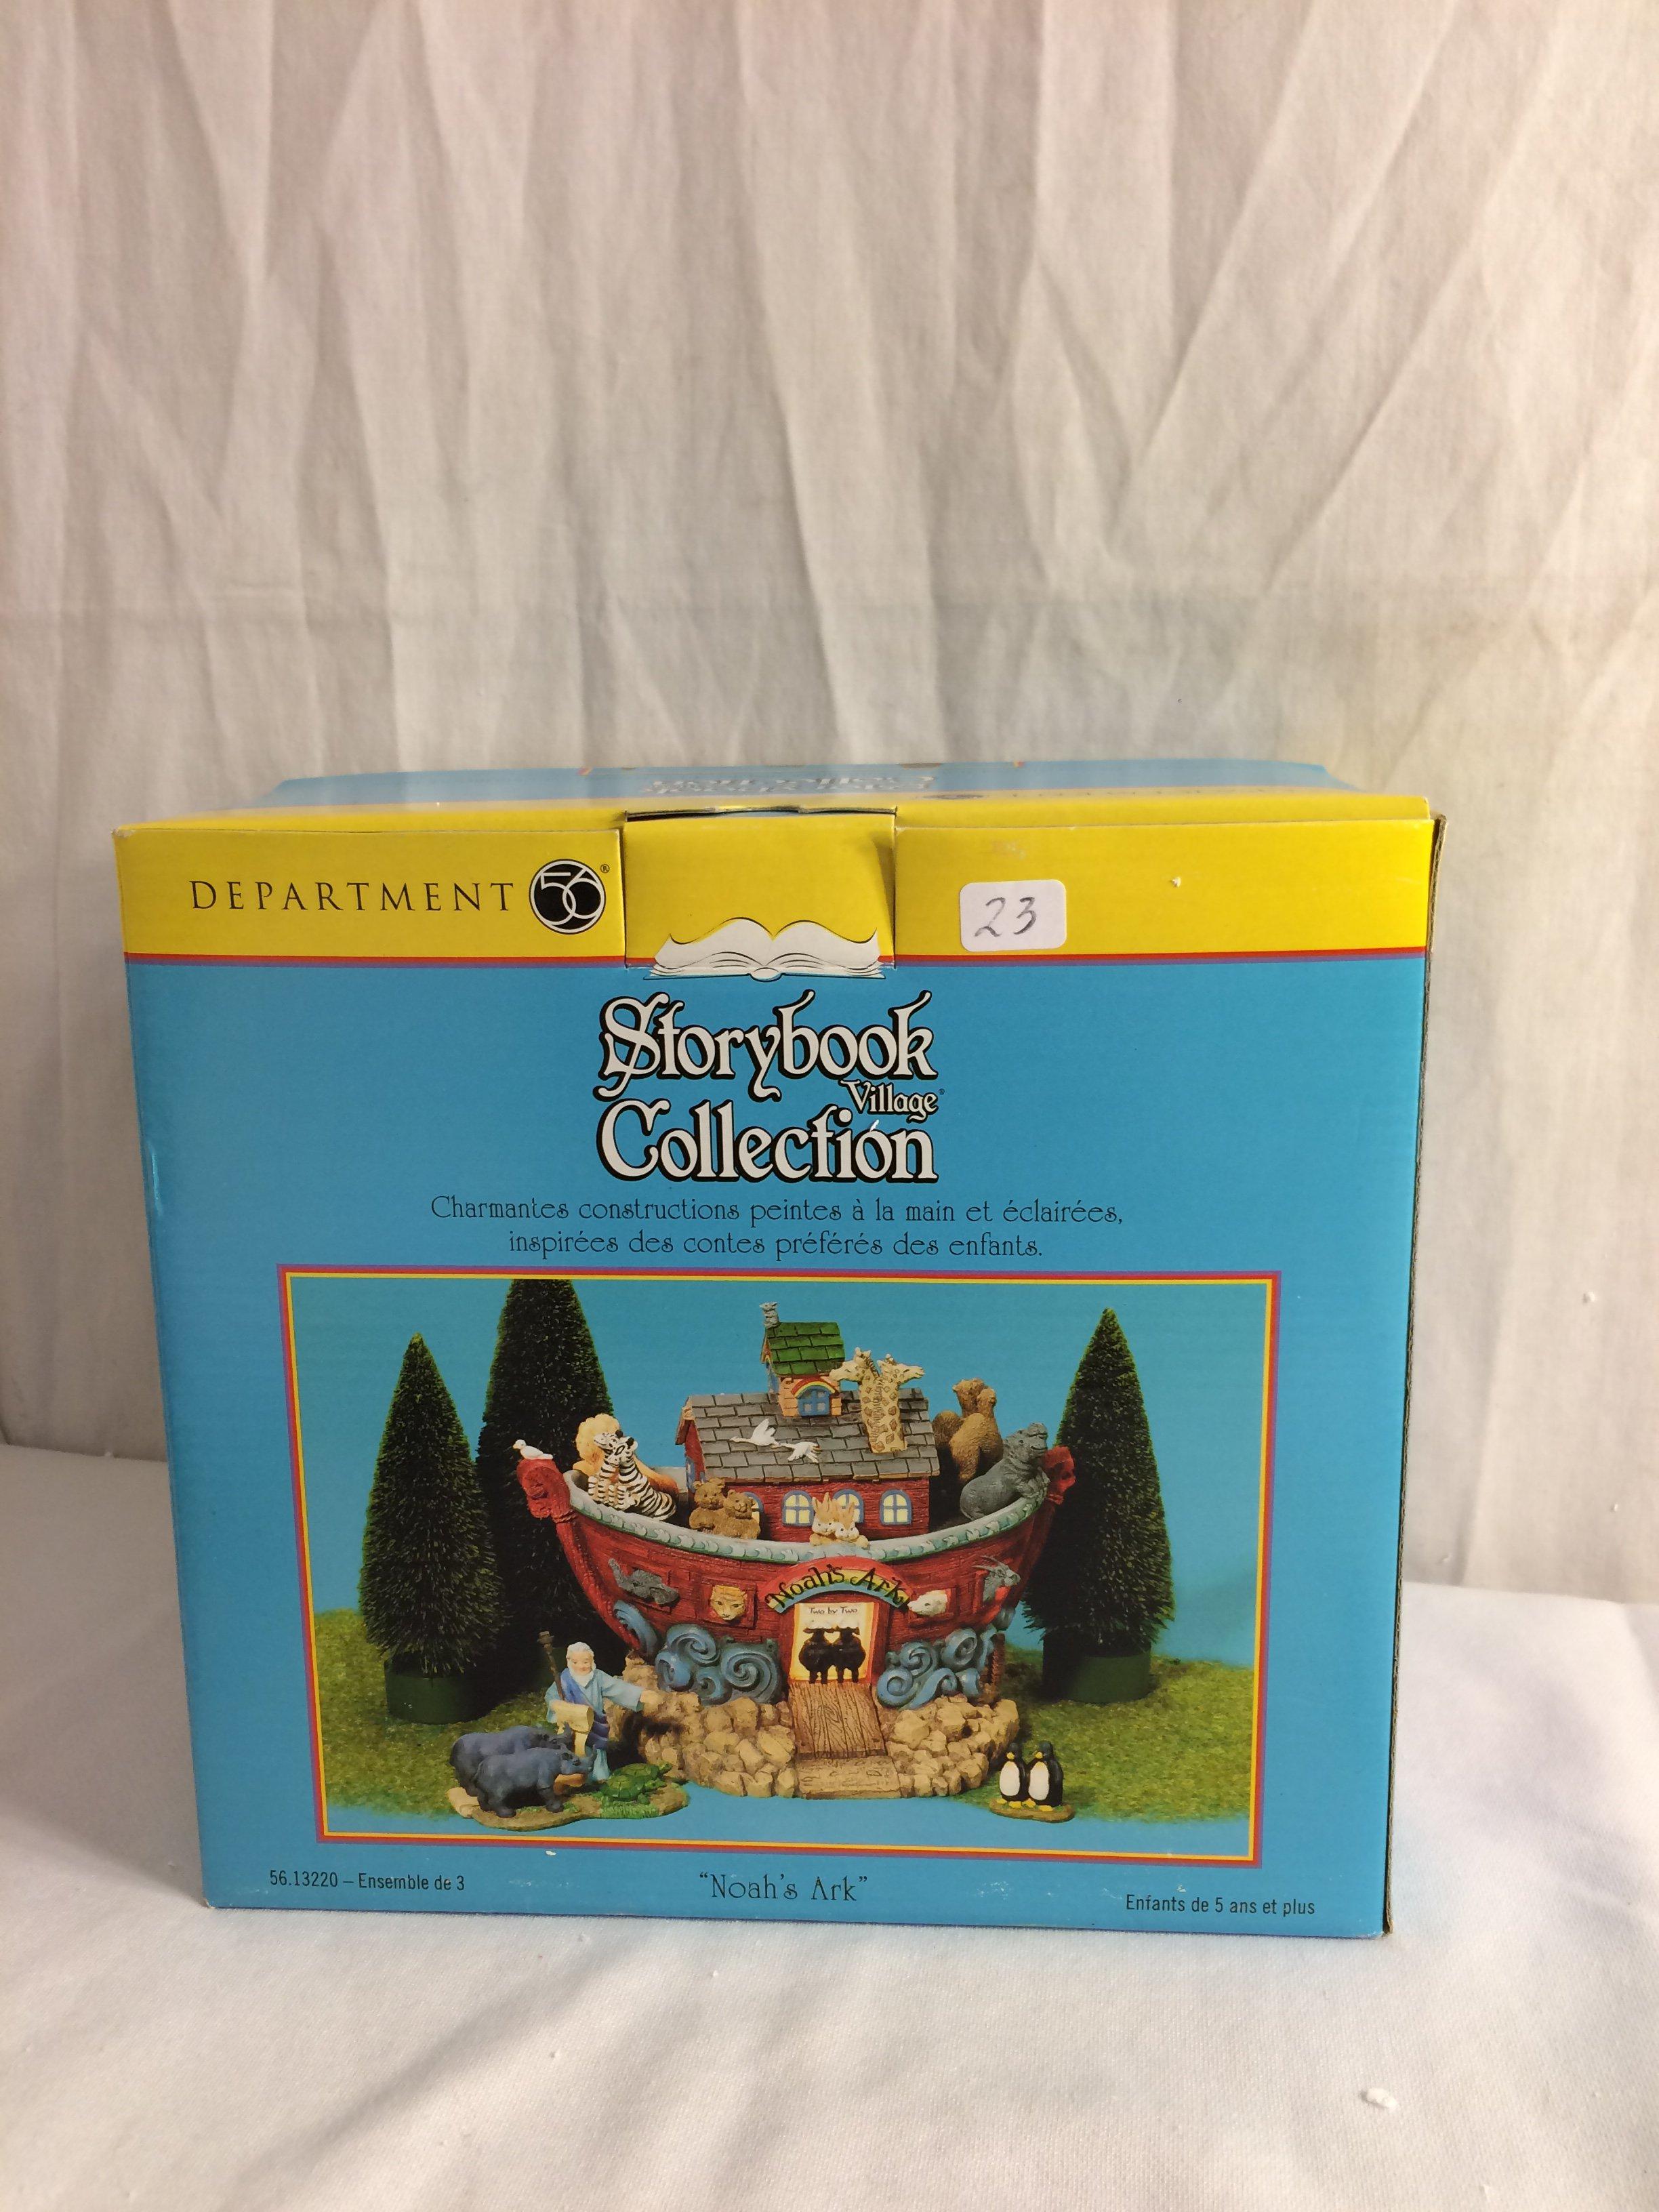 Storybook Village Collection "Noah's Ark" 56.13220 Handpainted Lighted Building  Set of 3 9"x10" Box